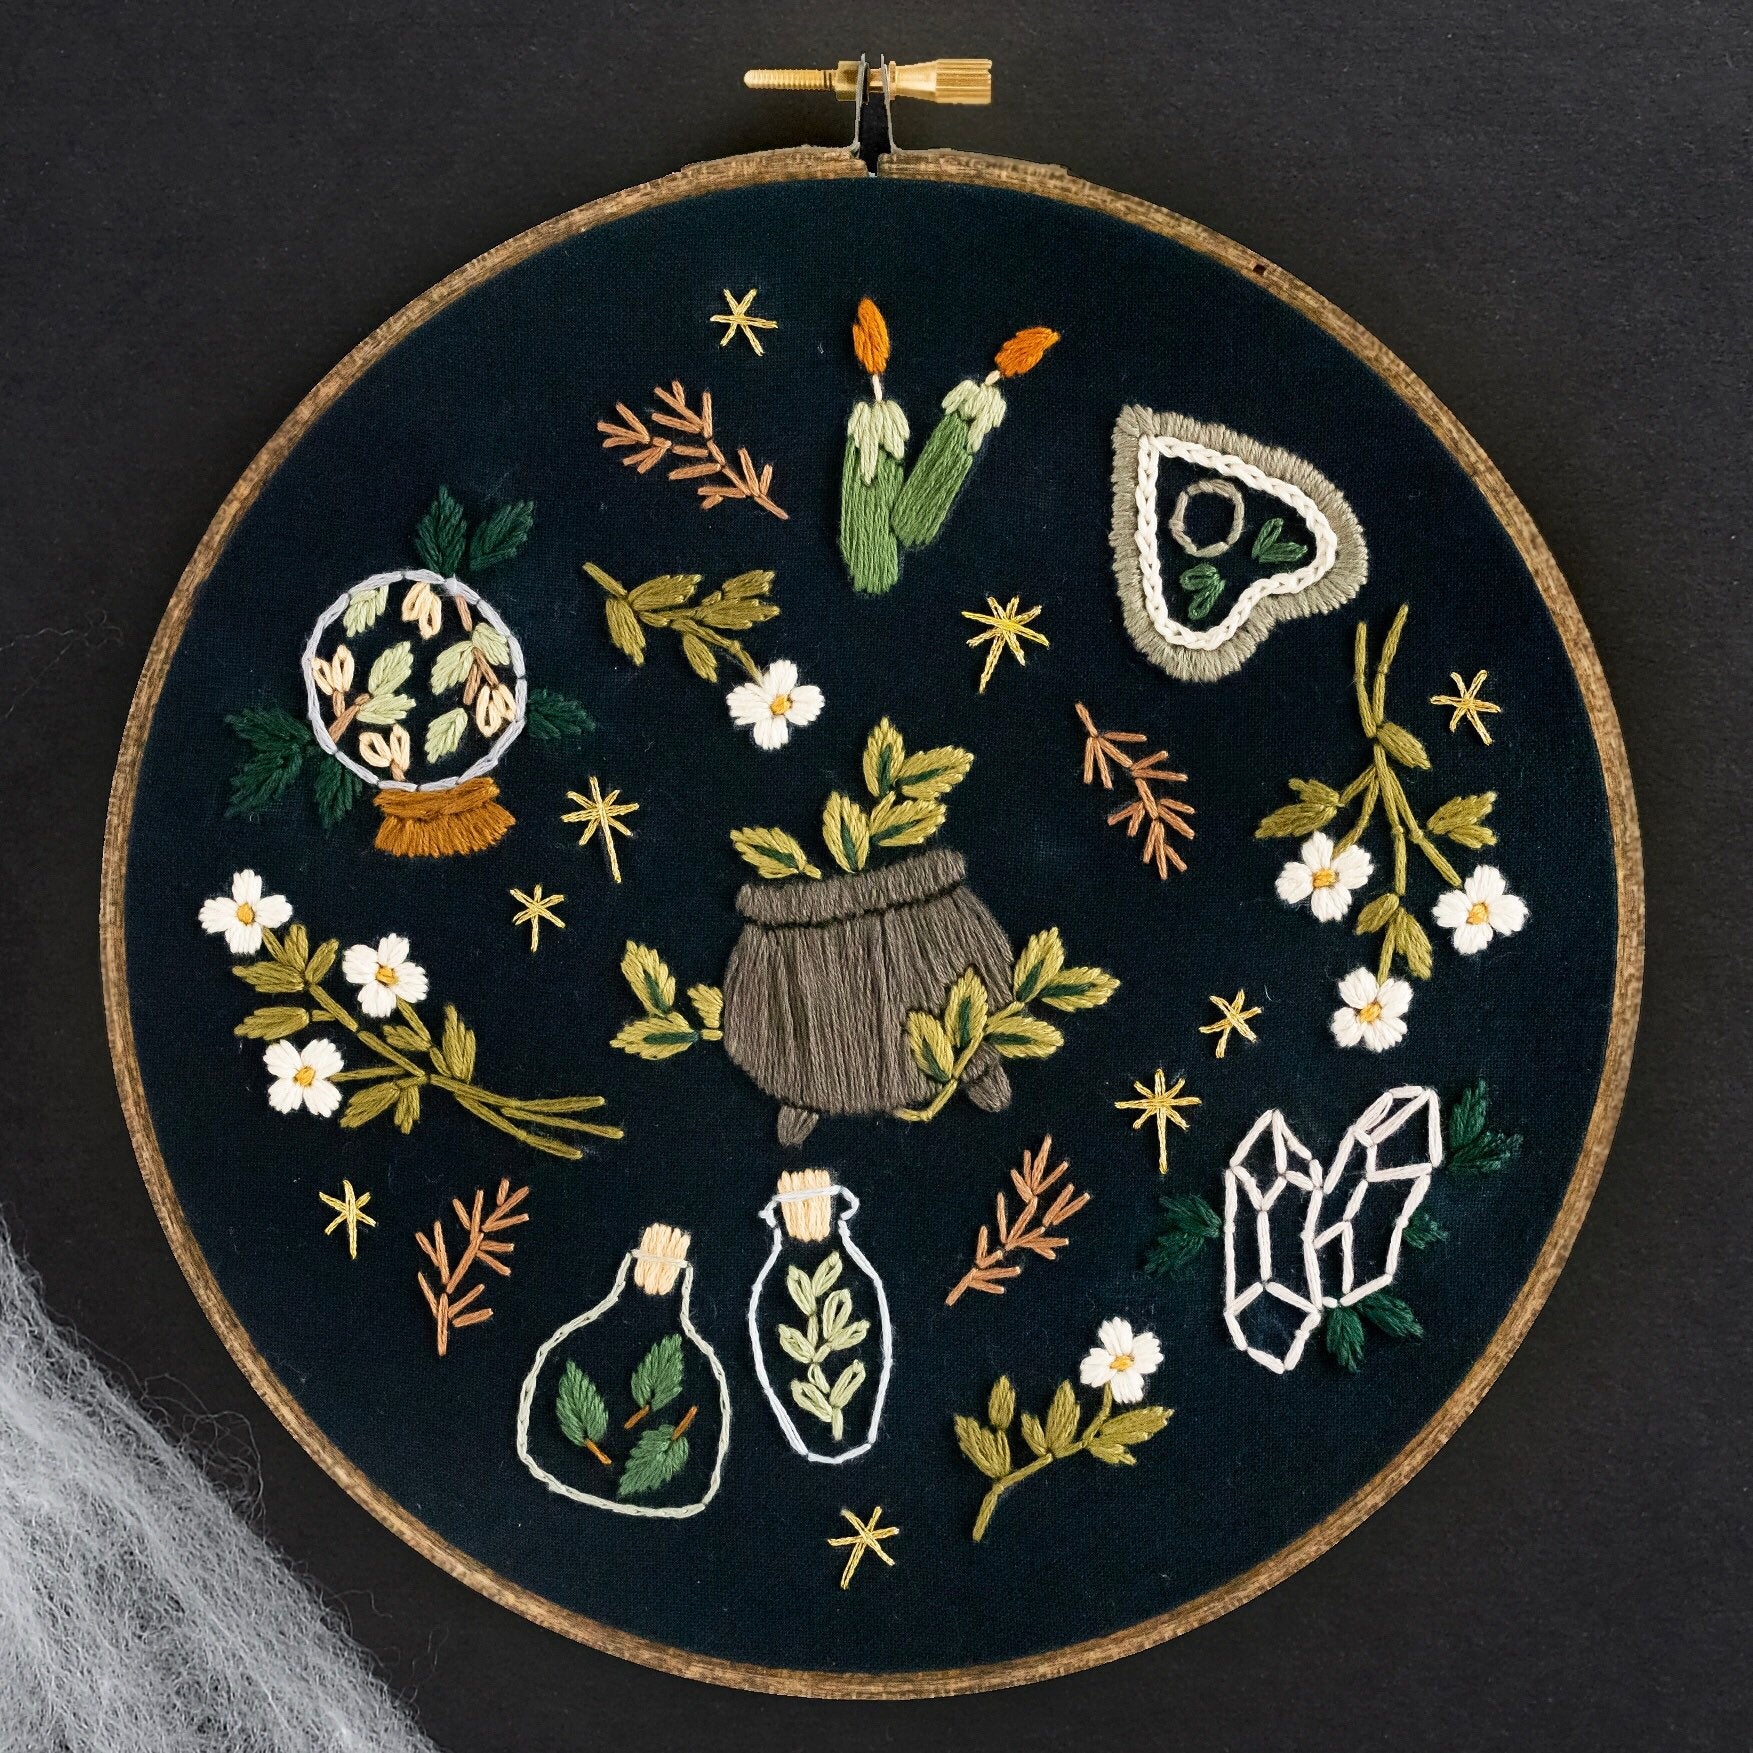 Witchcraft Embroidery Kit, DIY embroidery, embroidery kit, spooky embroidery, modern embroidery kit, green witch, Halloween embroidery